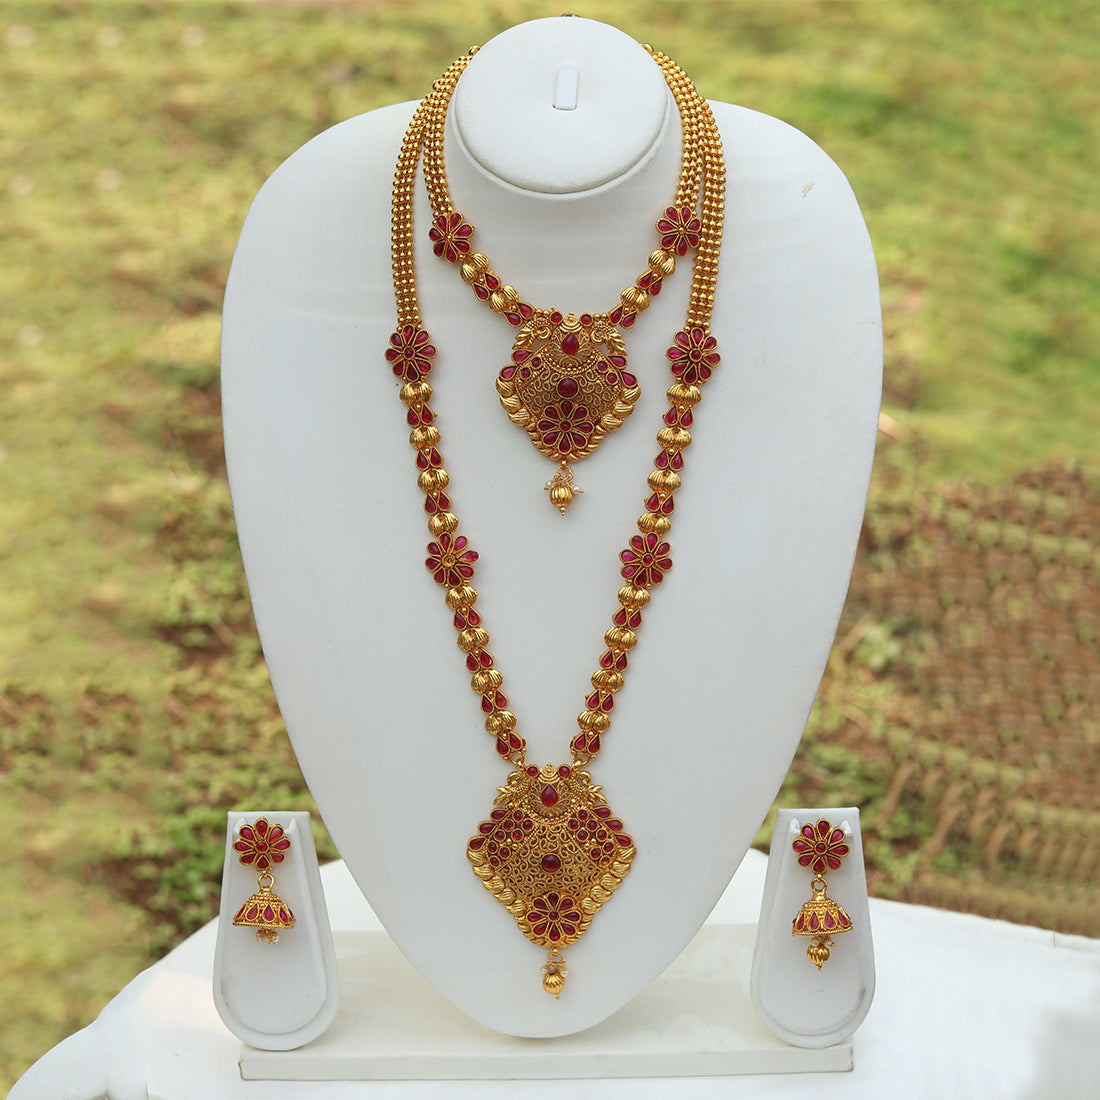 Beautiful Antique Gold Plated Design Haram Wedding Necklace with Jhumki Earring Set